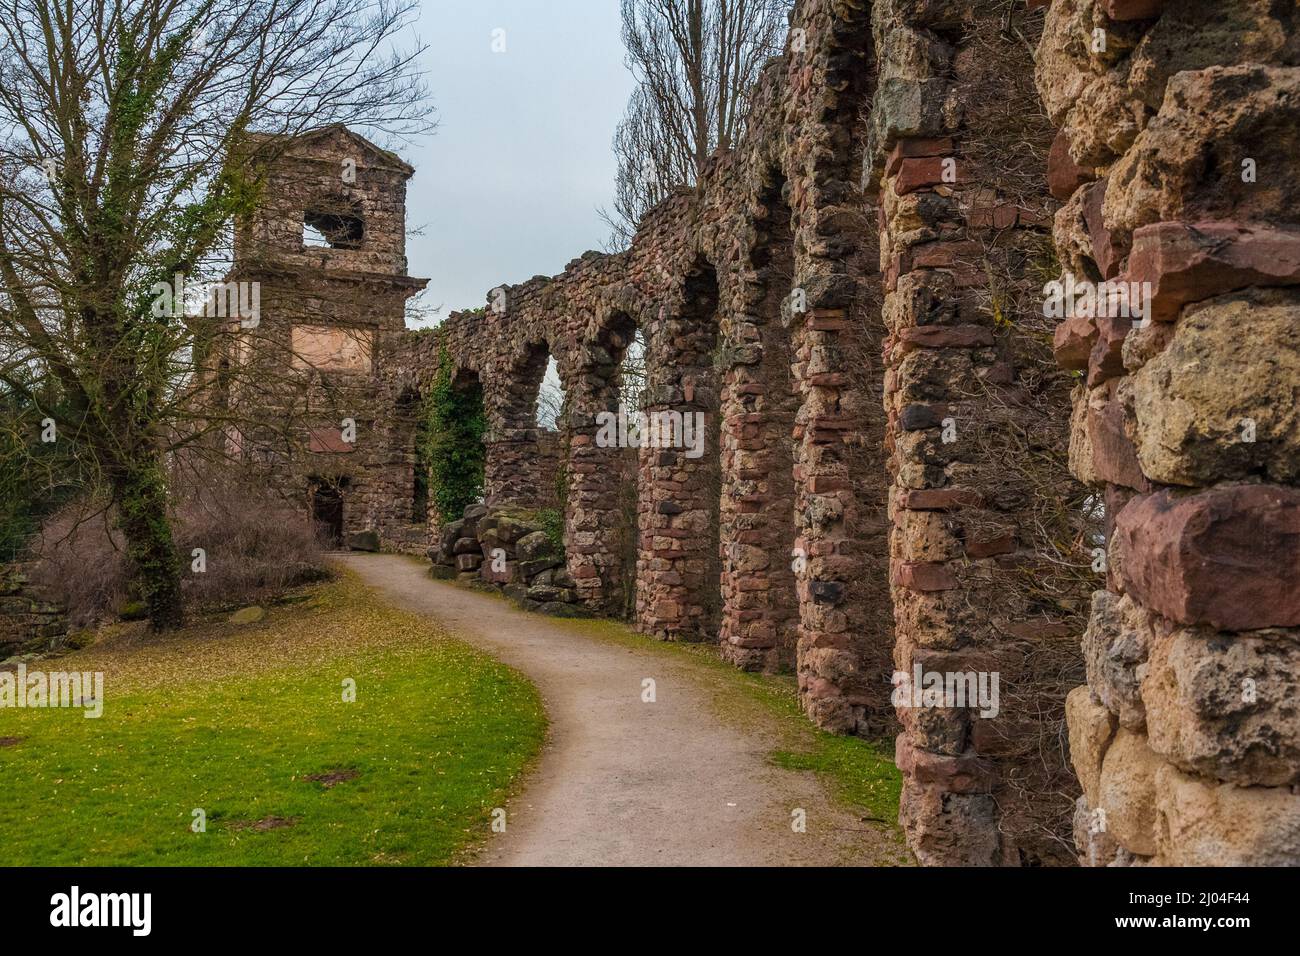 The walkway along the artificial ruins of the Roman aqueduct, leading to the likewise artificial ruins of a Roman water fort in the English landscape... Stock Photo